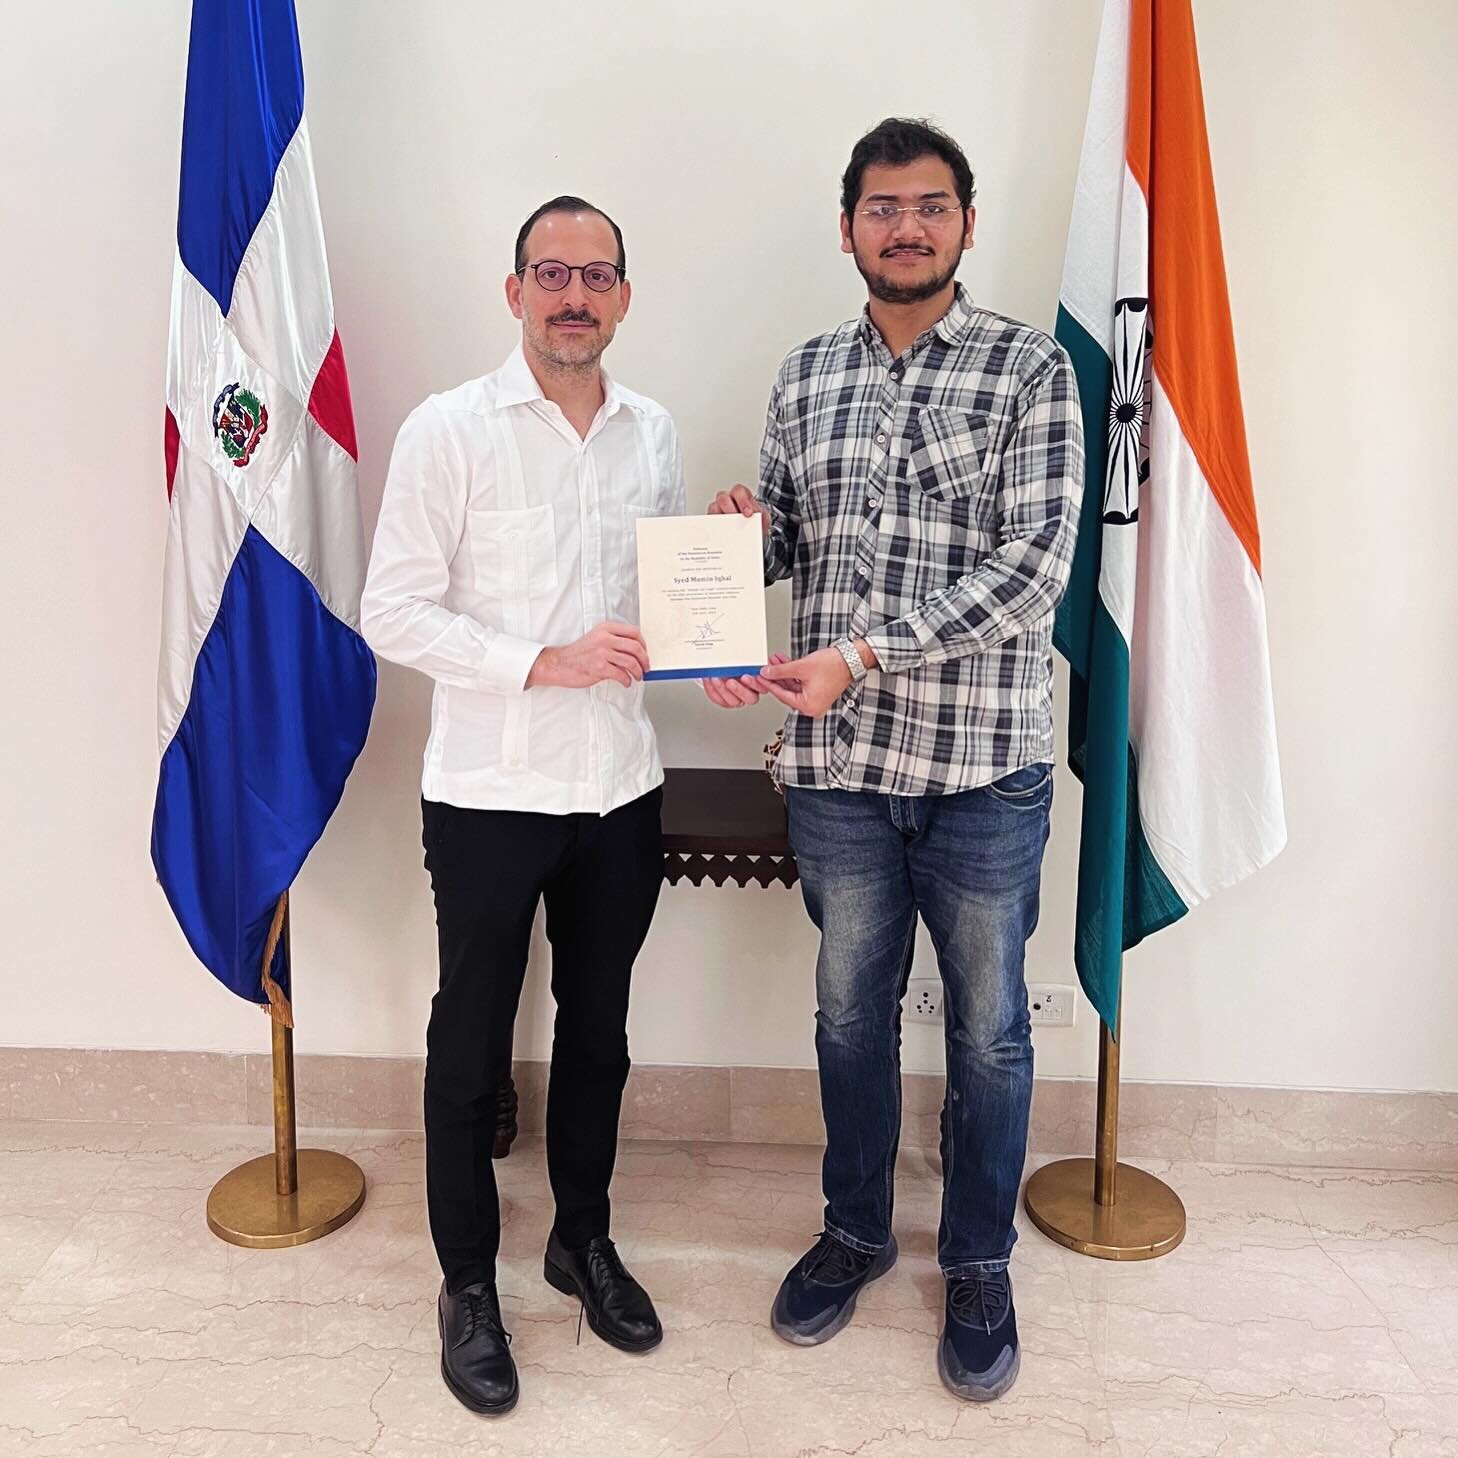 It was a pleasure for Ambassador David Puig to receive today the visit of Syed Momin Iqbal, winner of the Design our Logo contest, jointly organized by our mission and @indiaindominicanrepublic for the design of a logo for the 25th anniversary of dip